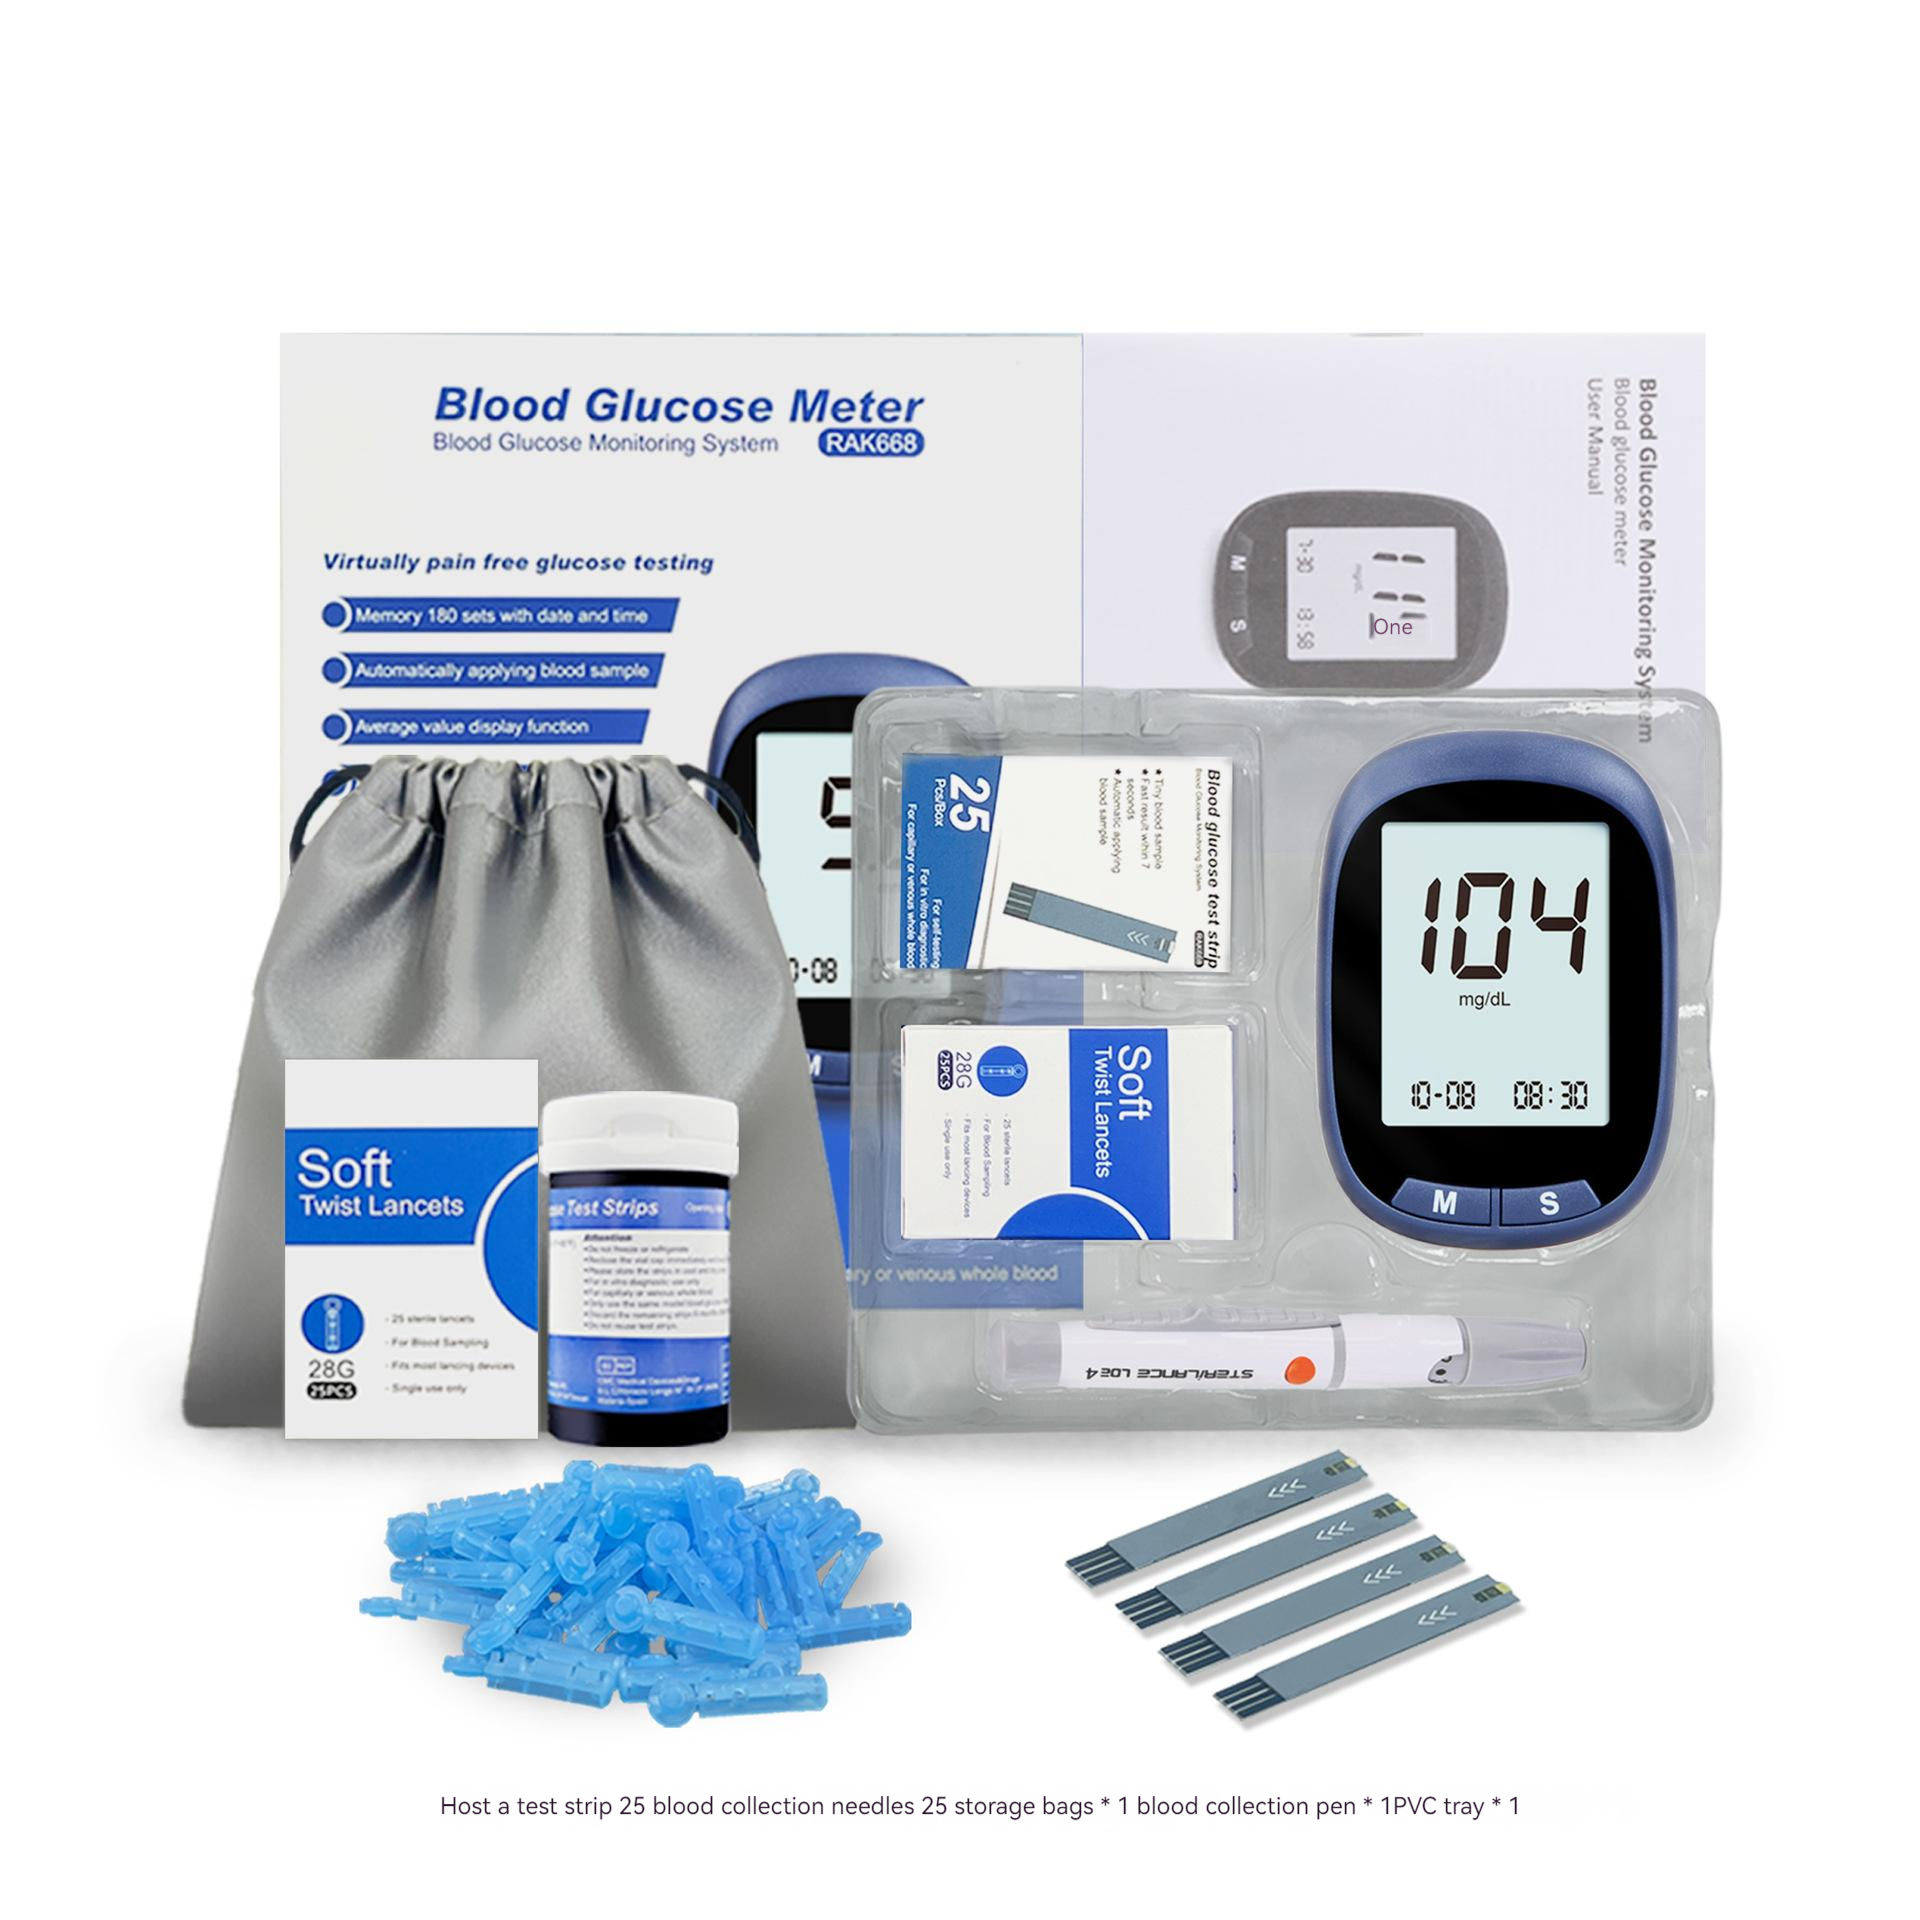 DBG-001 Portable Blood Glucose Test Kit For Home Use